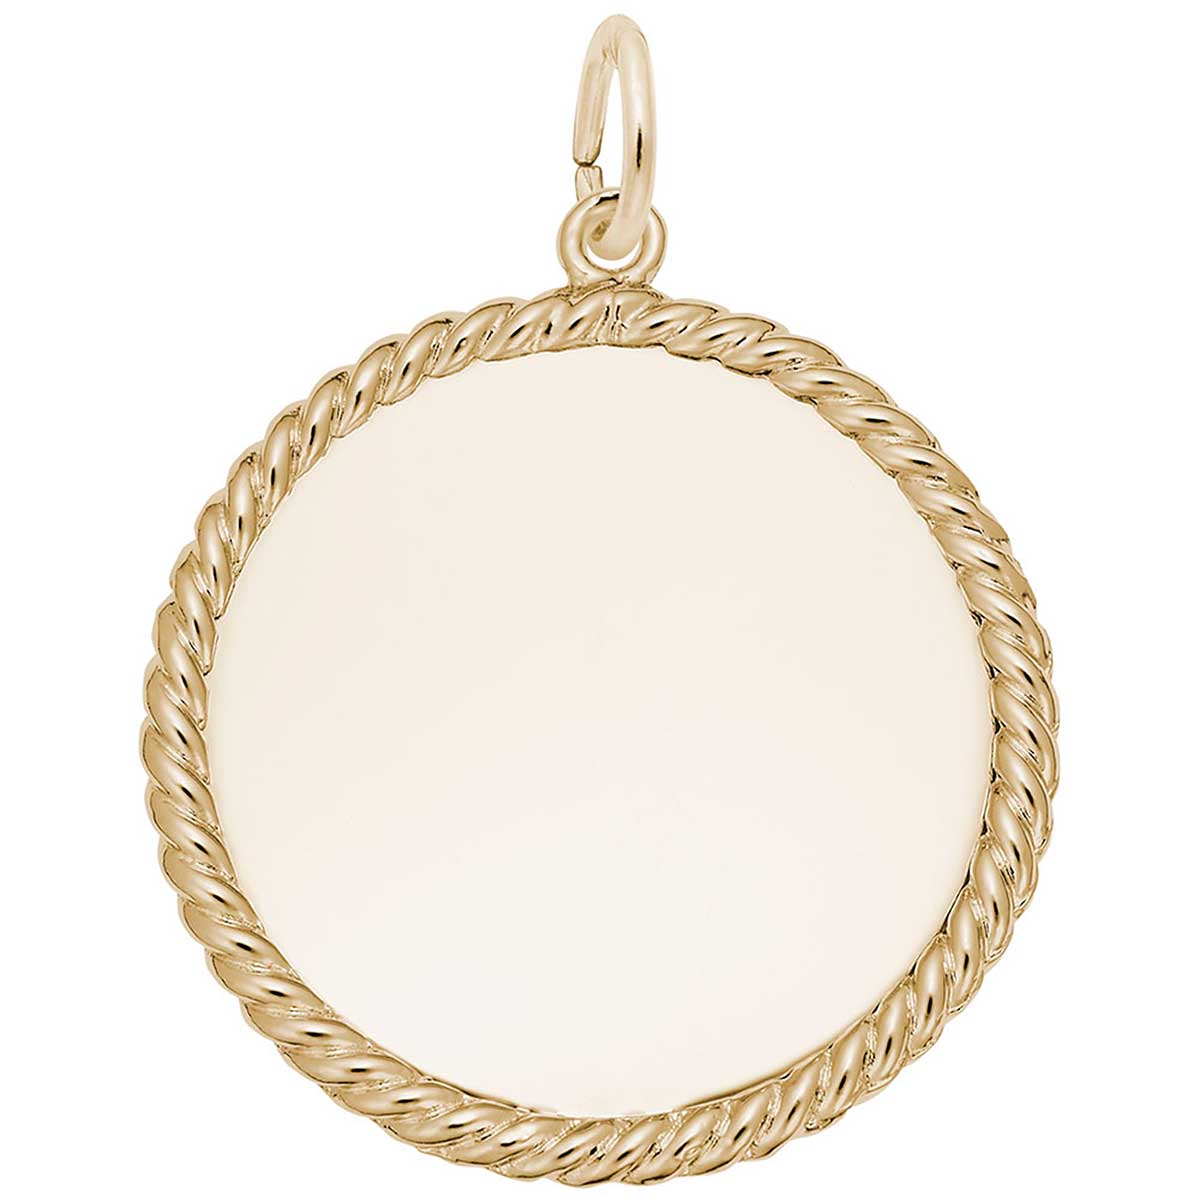 Rembrandt Charms 14K Yellow Gold Frisbee Charm on a 16 Box or Curb Chain Necklace 18 or 20 inch Rope